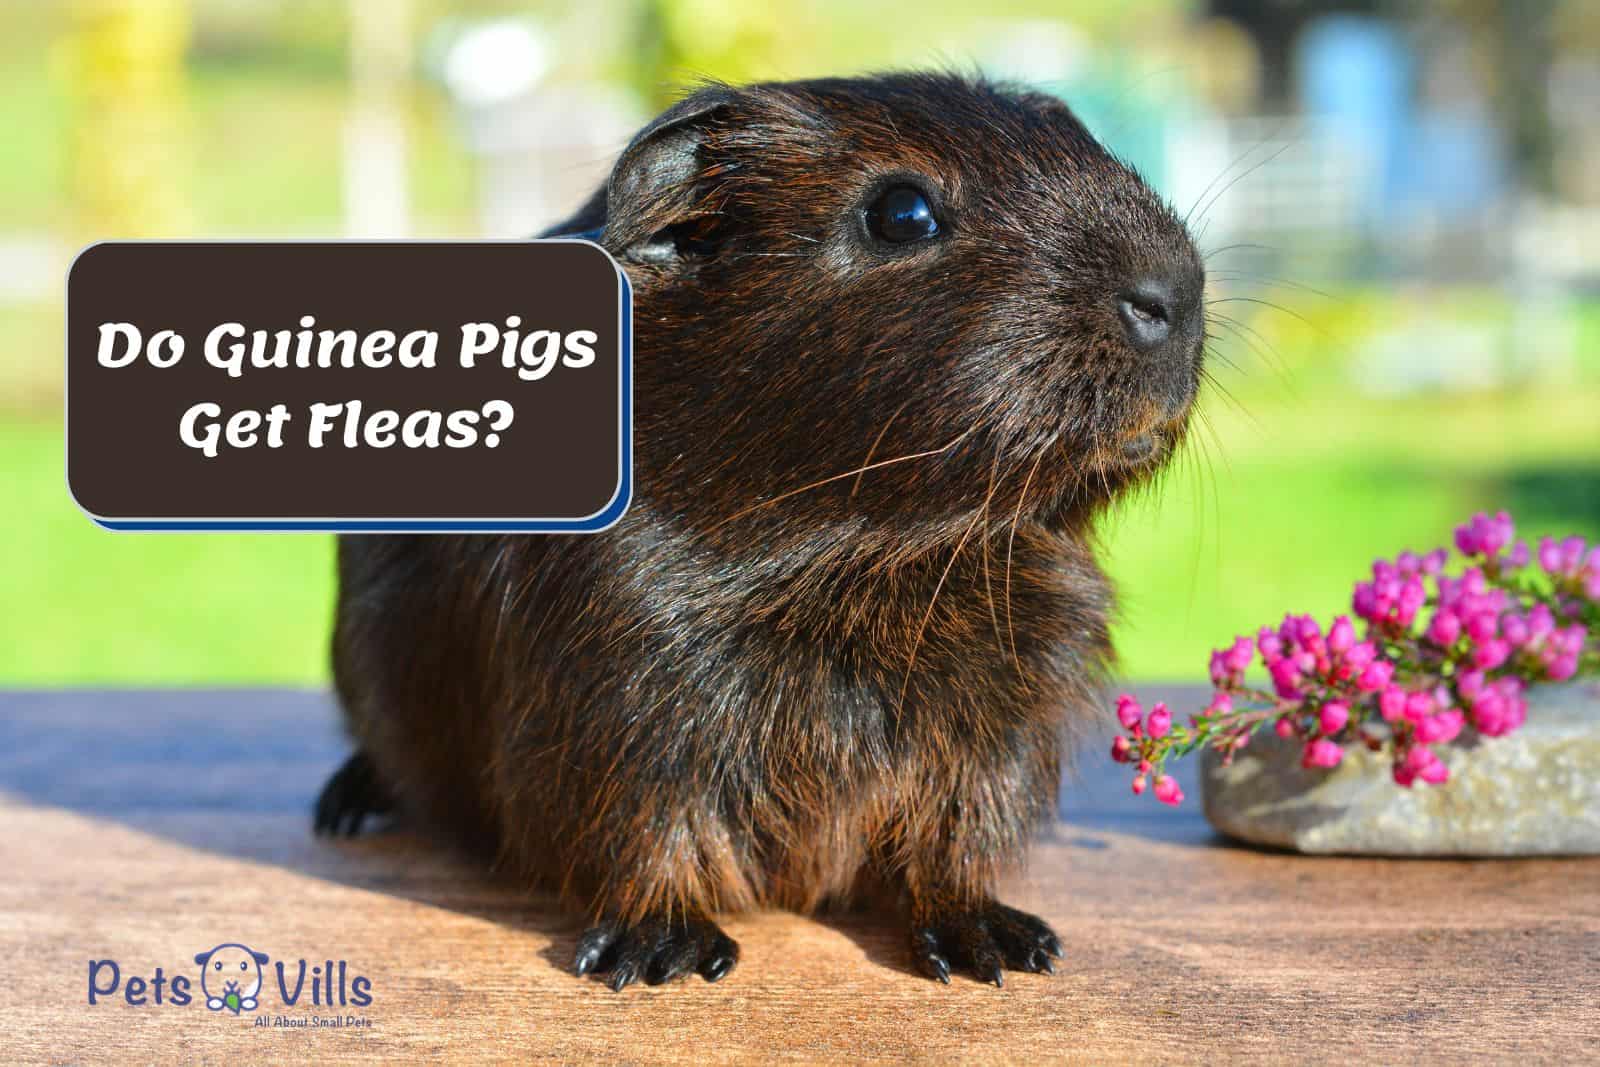 cute guinea pig standing outside beside the text 